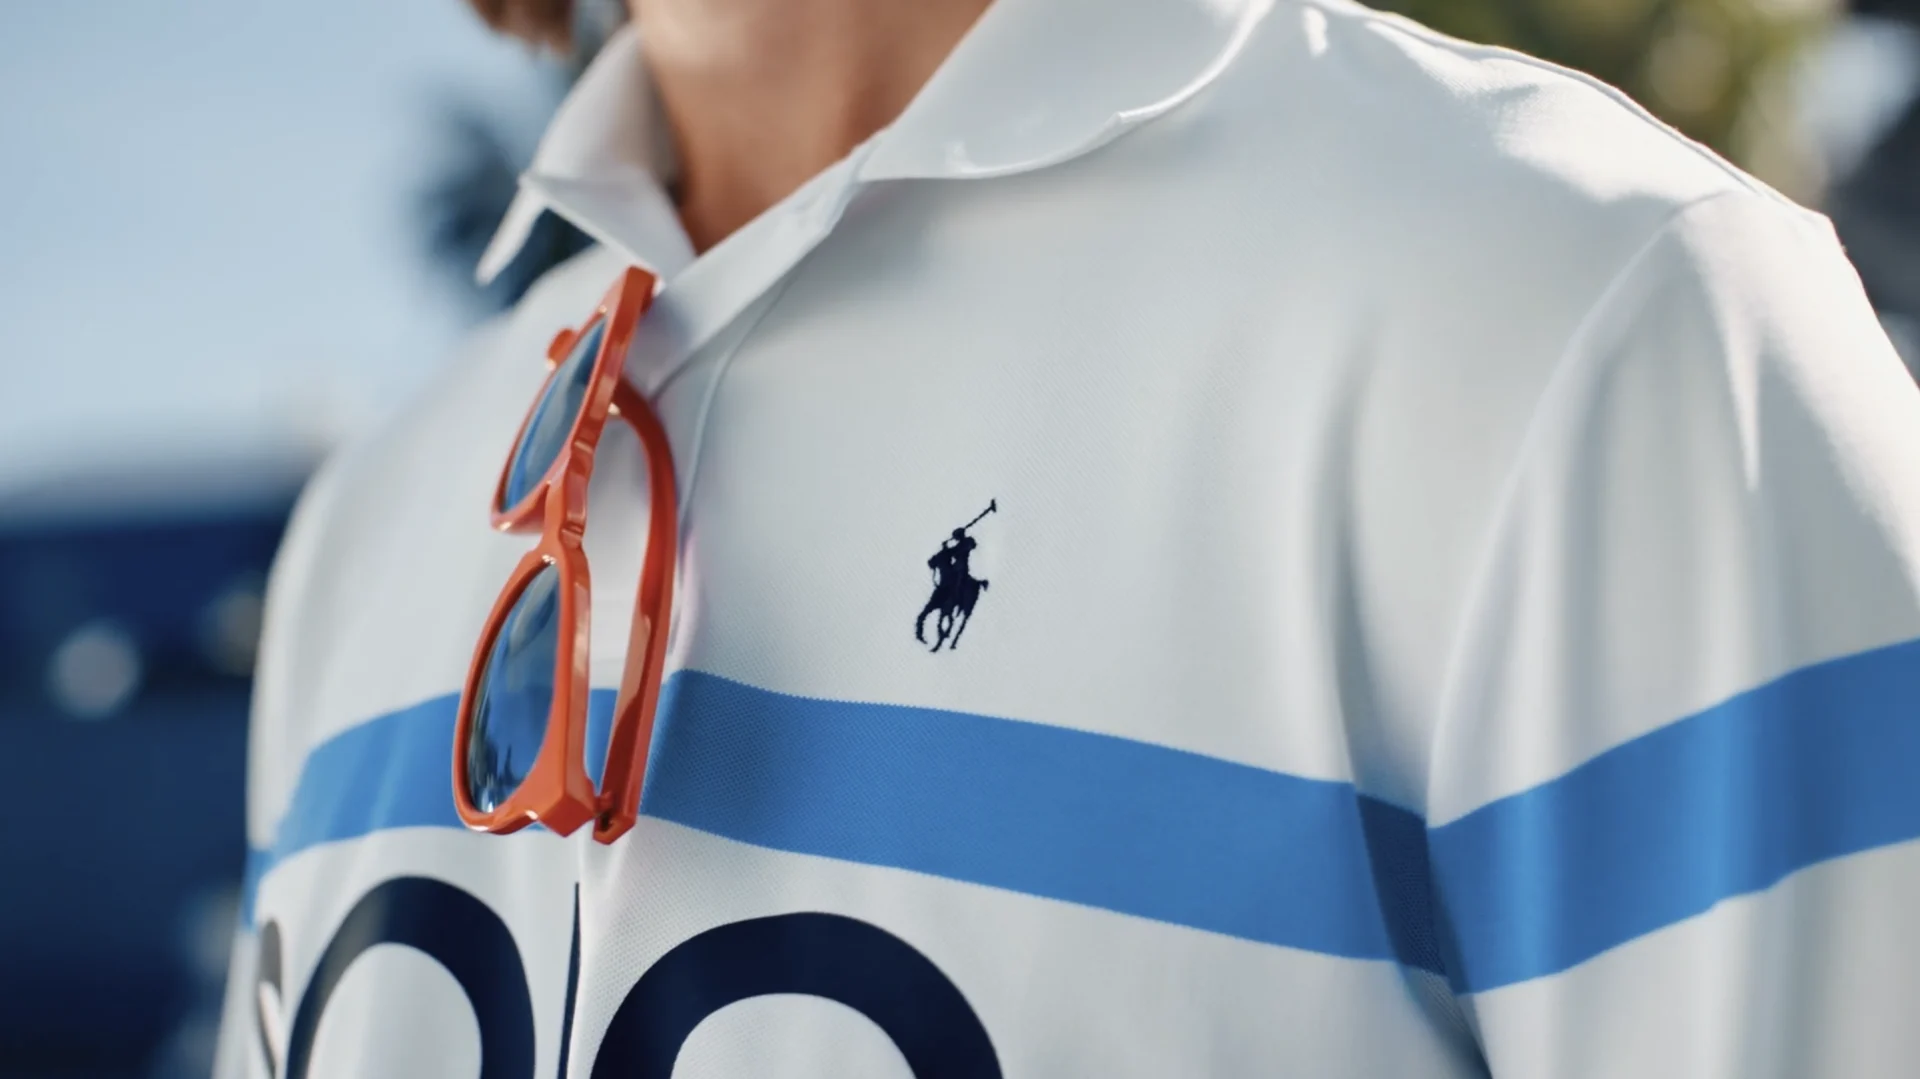 It's the summer of sport and BGSTR designed the newest Ralph Lauren 'World of Sports' promos to coincide with the many athletics-related campaigns the brand is producing this season. 